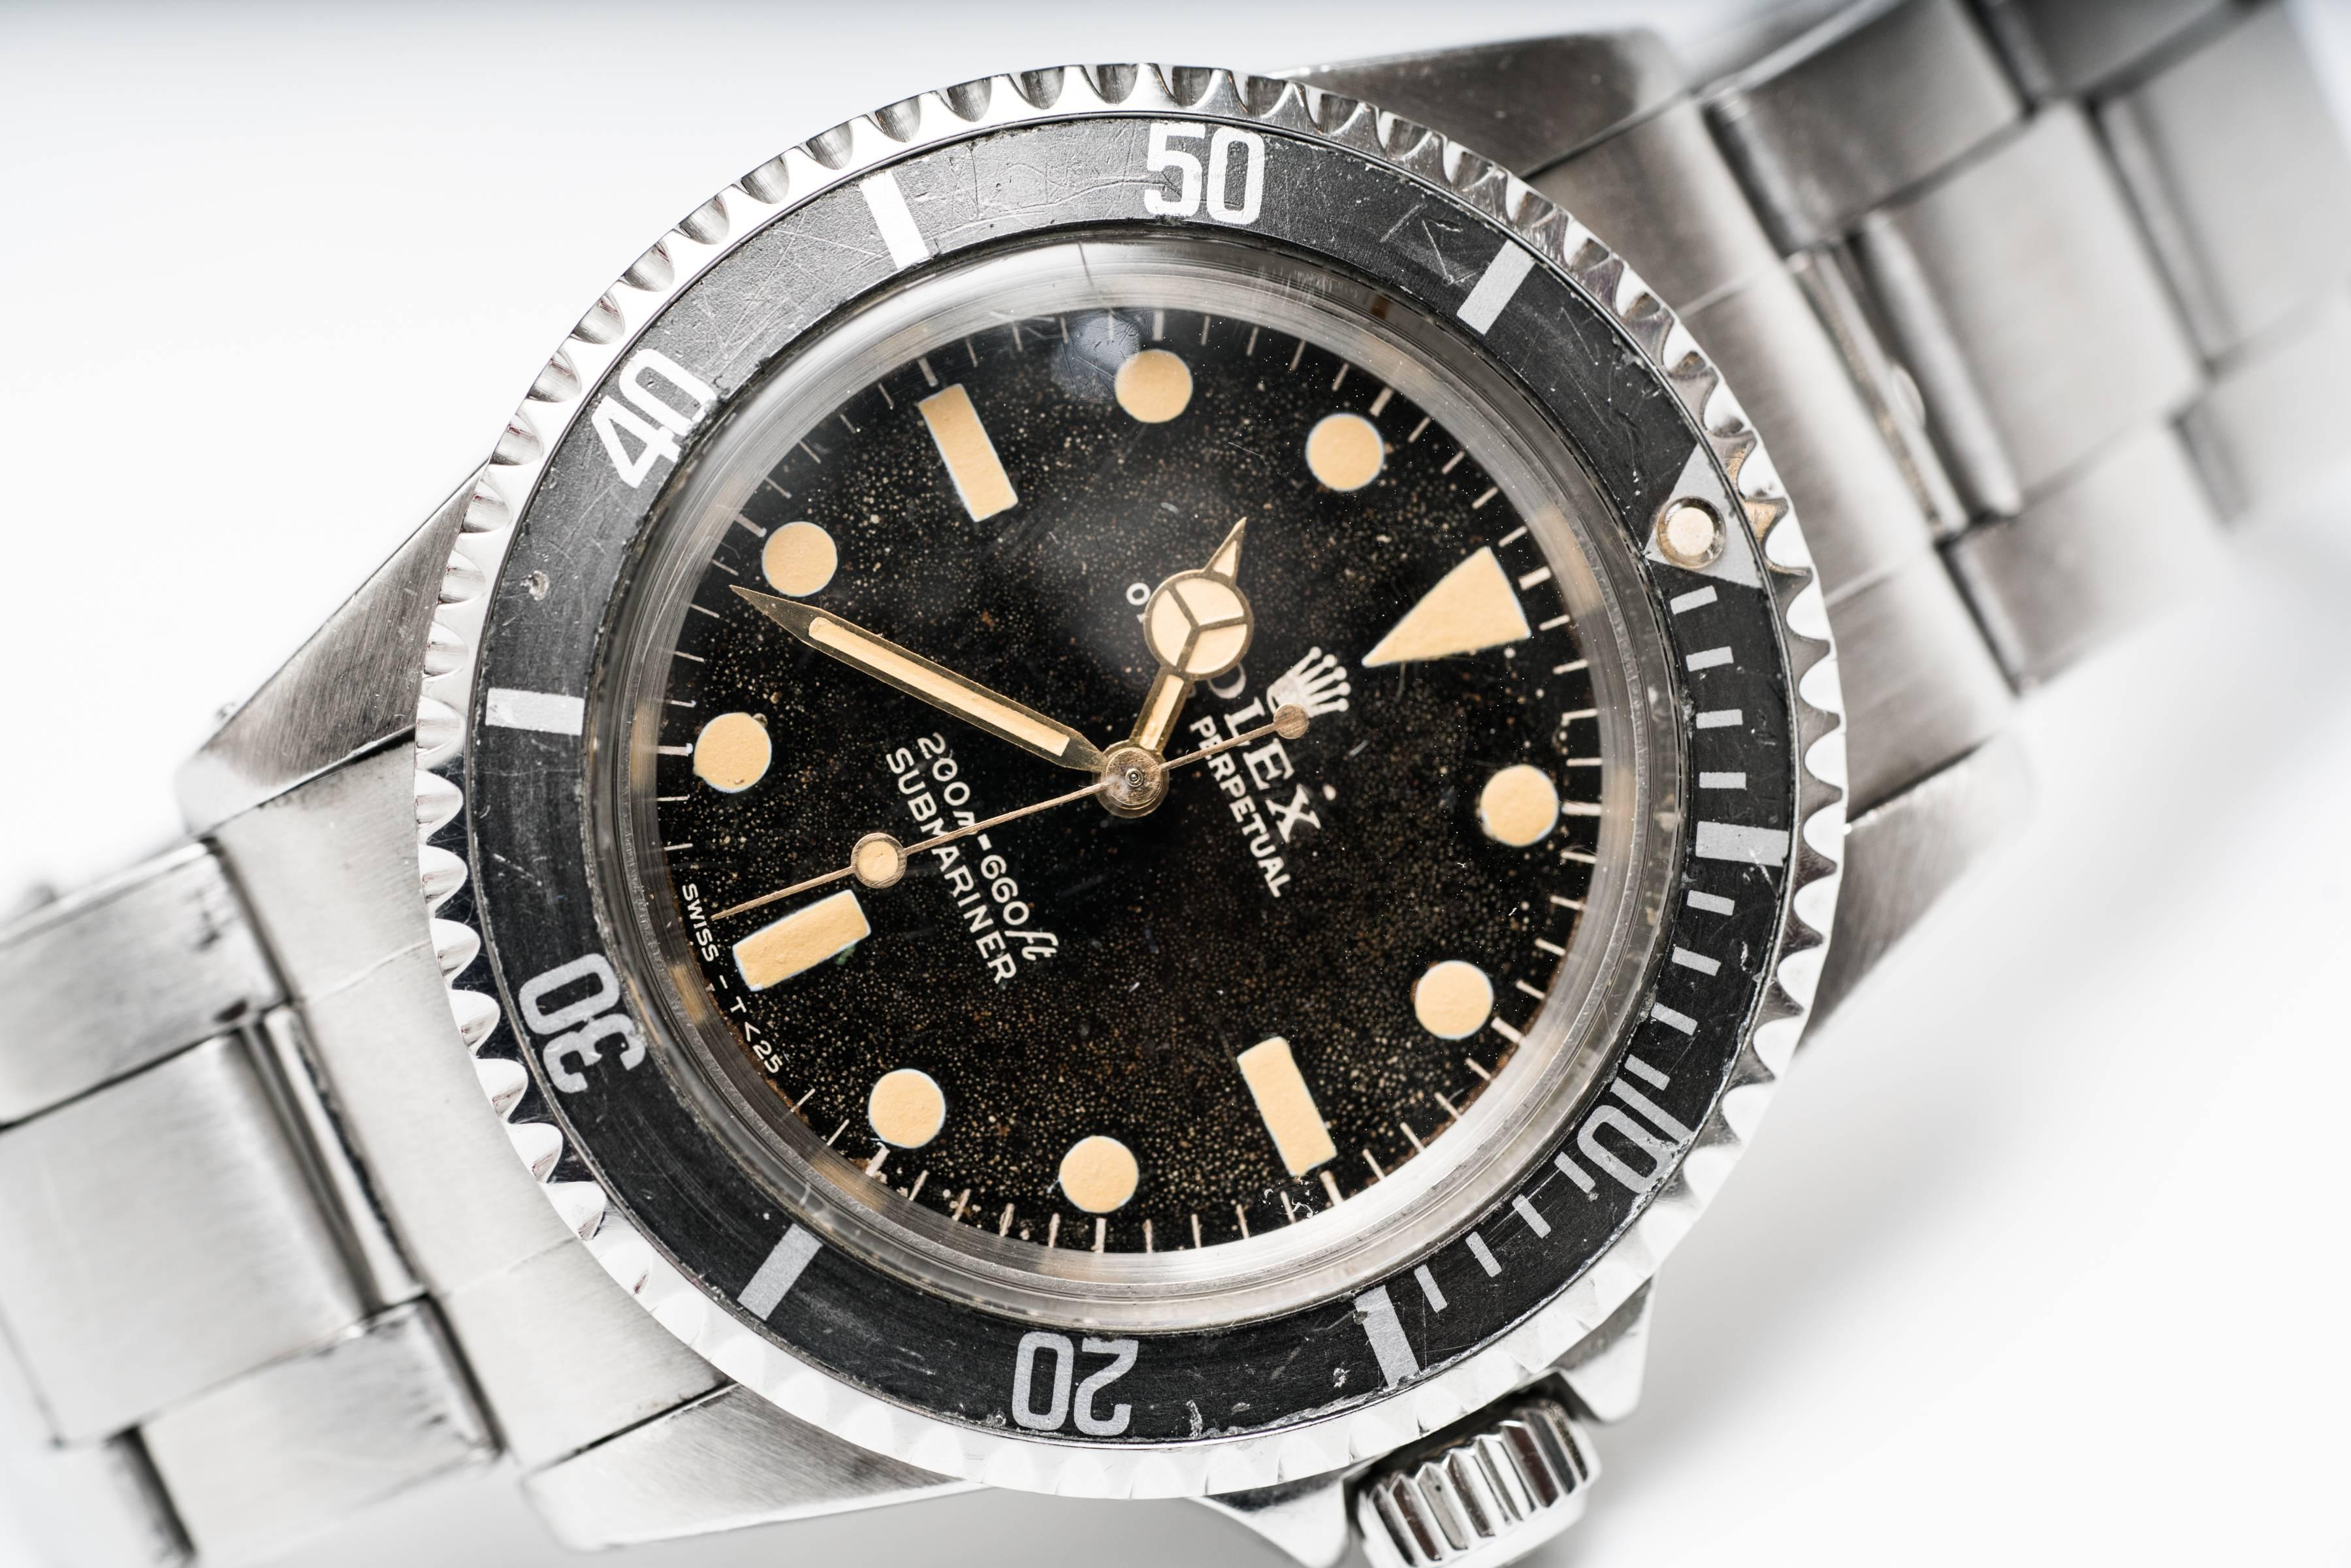 Rolex 5513 Matte Submariner, Rare Collector's Item
Serial #: 348XXX
Model #: 5513
Original Gold Hands 
Meters First Dial (design no longer found in modern Rolexes)
Minor Scratches on Crystal
Subtle Patina Along Dial 
Timeless Rolex Design 
Fits Size